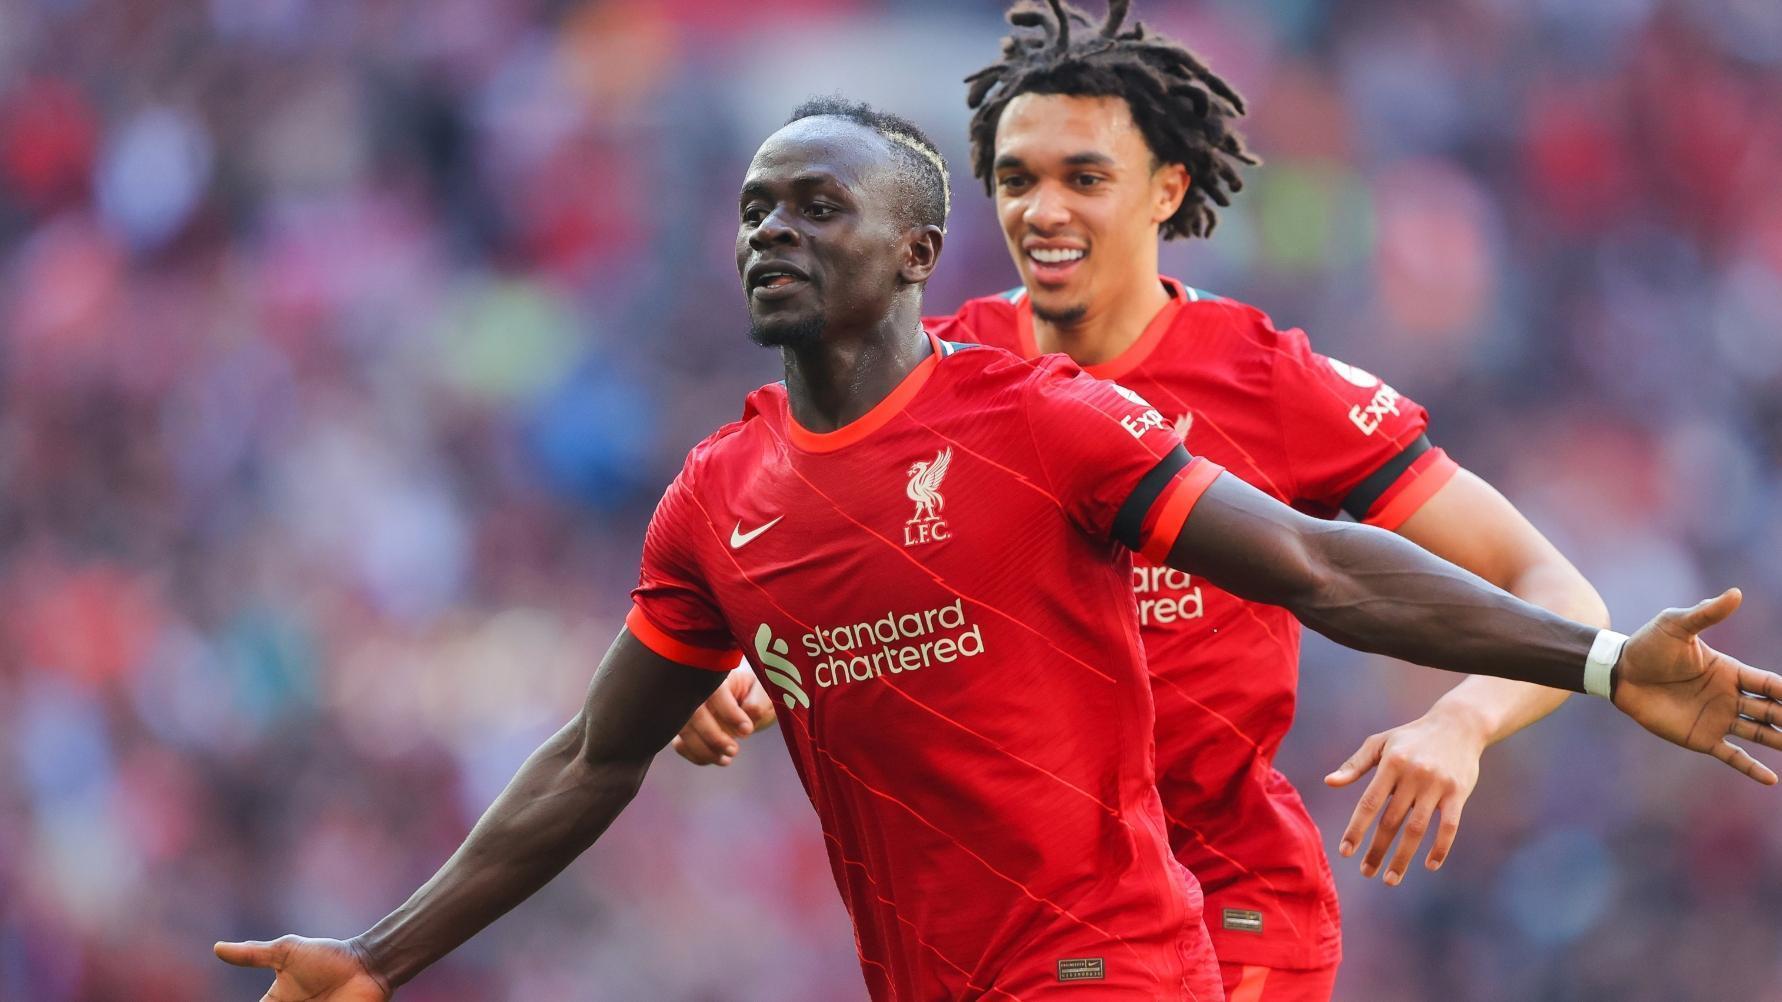 Premier League: Sadio Mane is VERY UNHAPPY with Liverpool treatment, Senegalese winger looks for other options as Bayern Munich links emerge - Check OUT